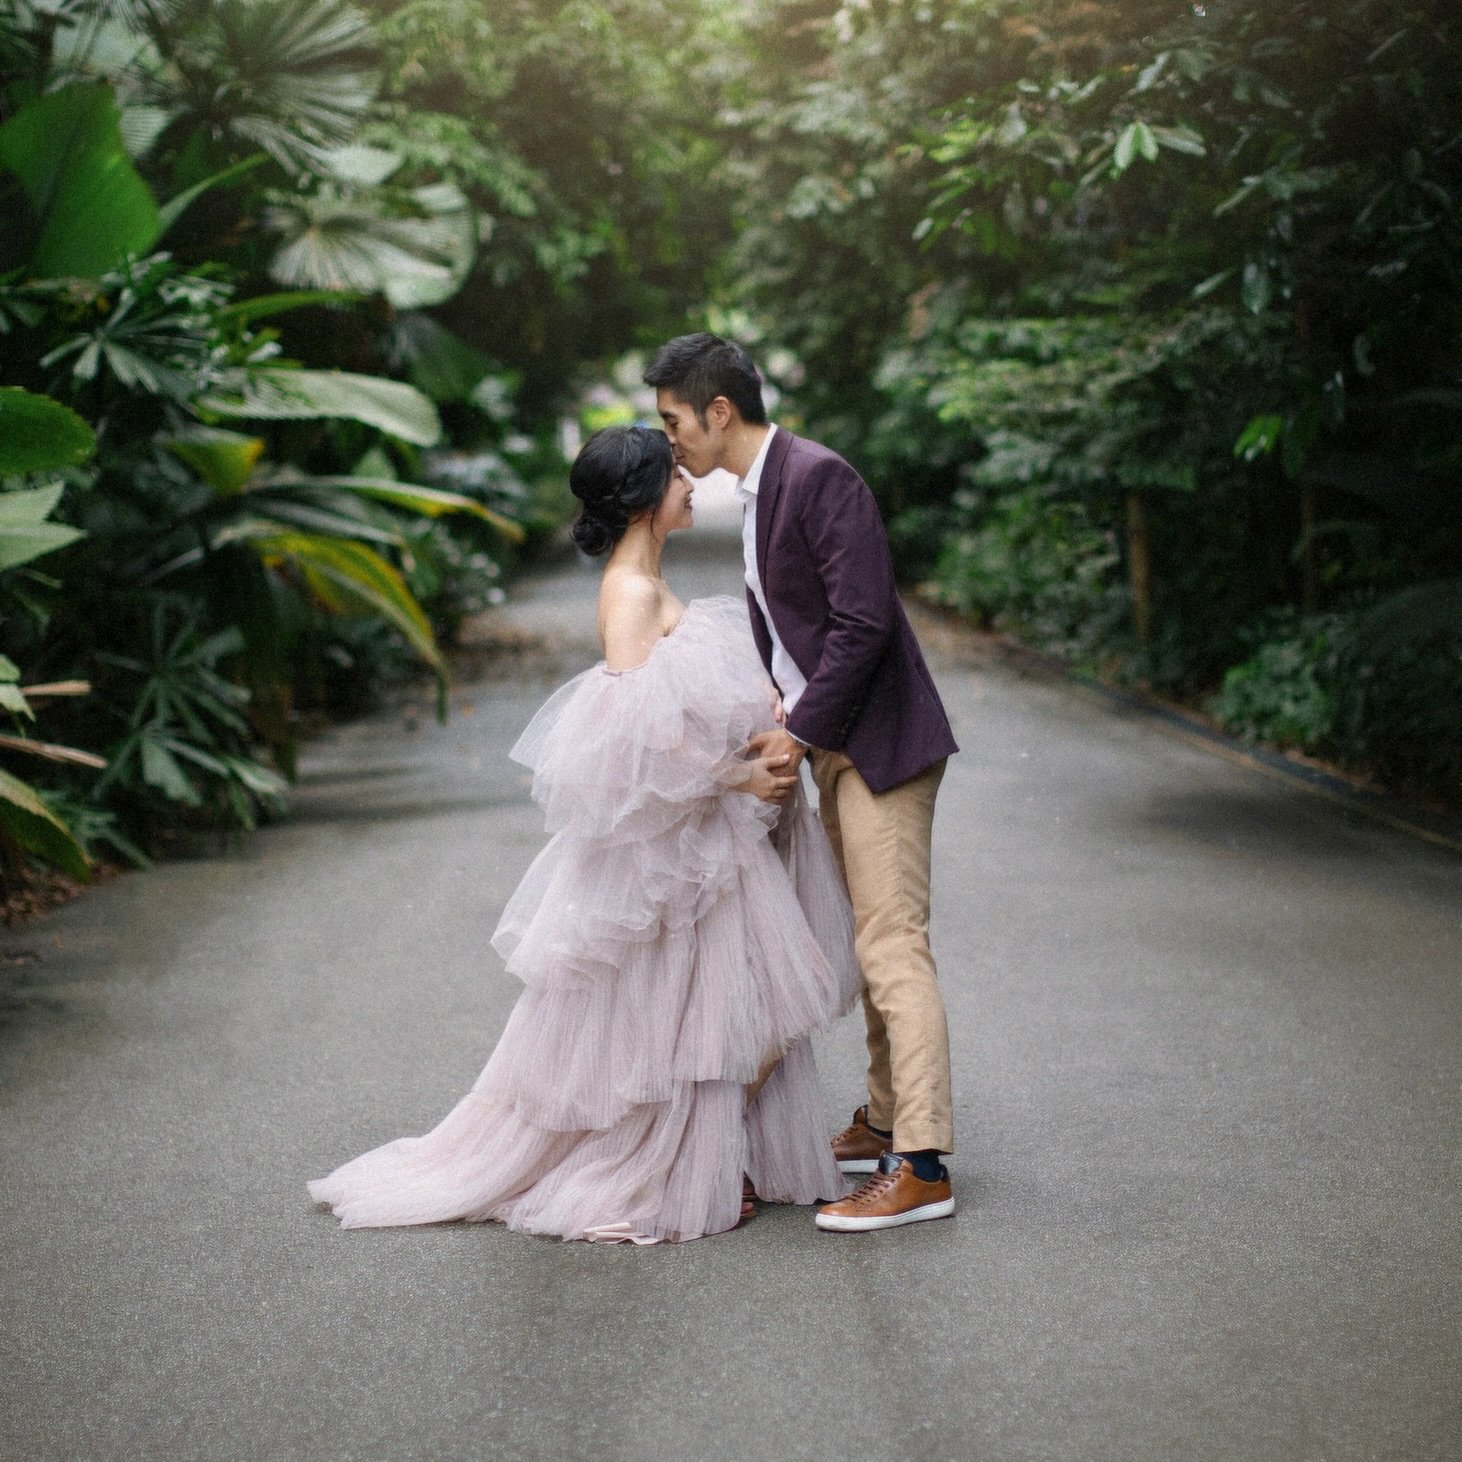 🌿✨ Maternity Magic at the Botanical Garden ✨🌿

What a beautiful day it was, despite the rain, capturing moments with Janine and Kenneth! 🌧️💑 Janine looked absolutely stunning in one of my haute couture maternity dresses (sorry Kenneth, not your s